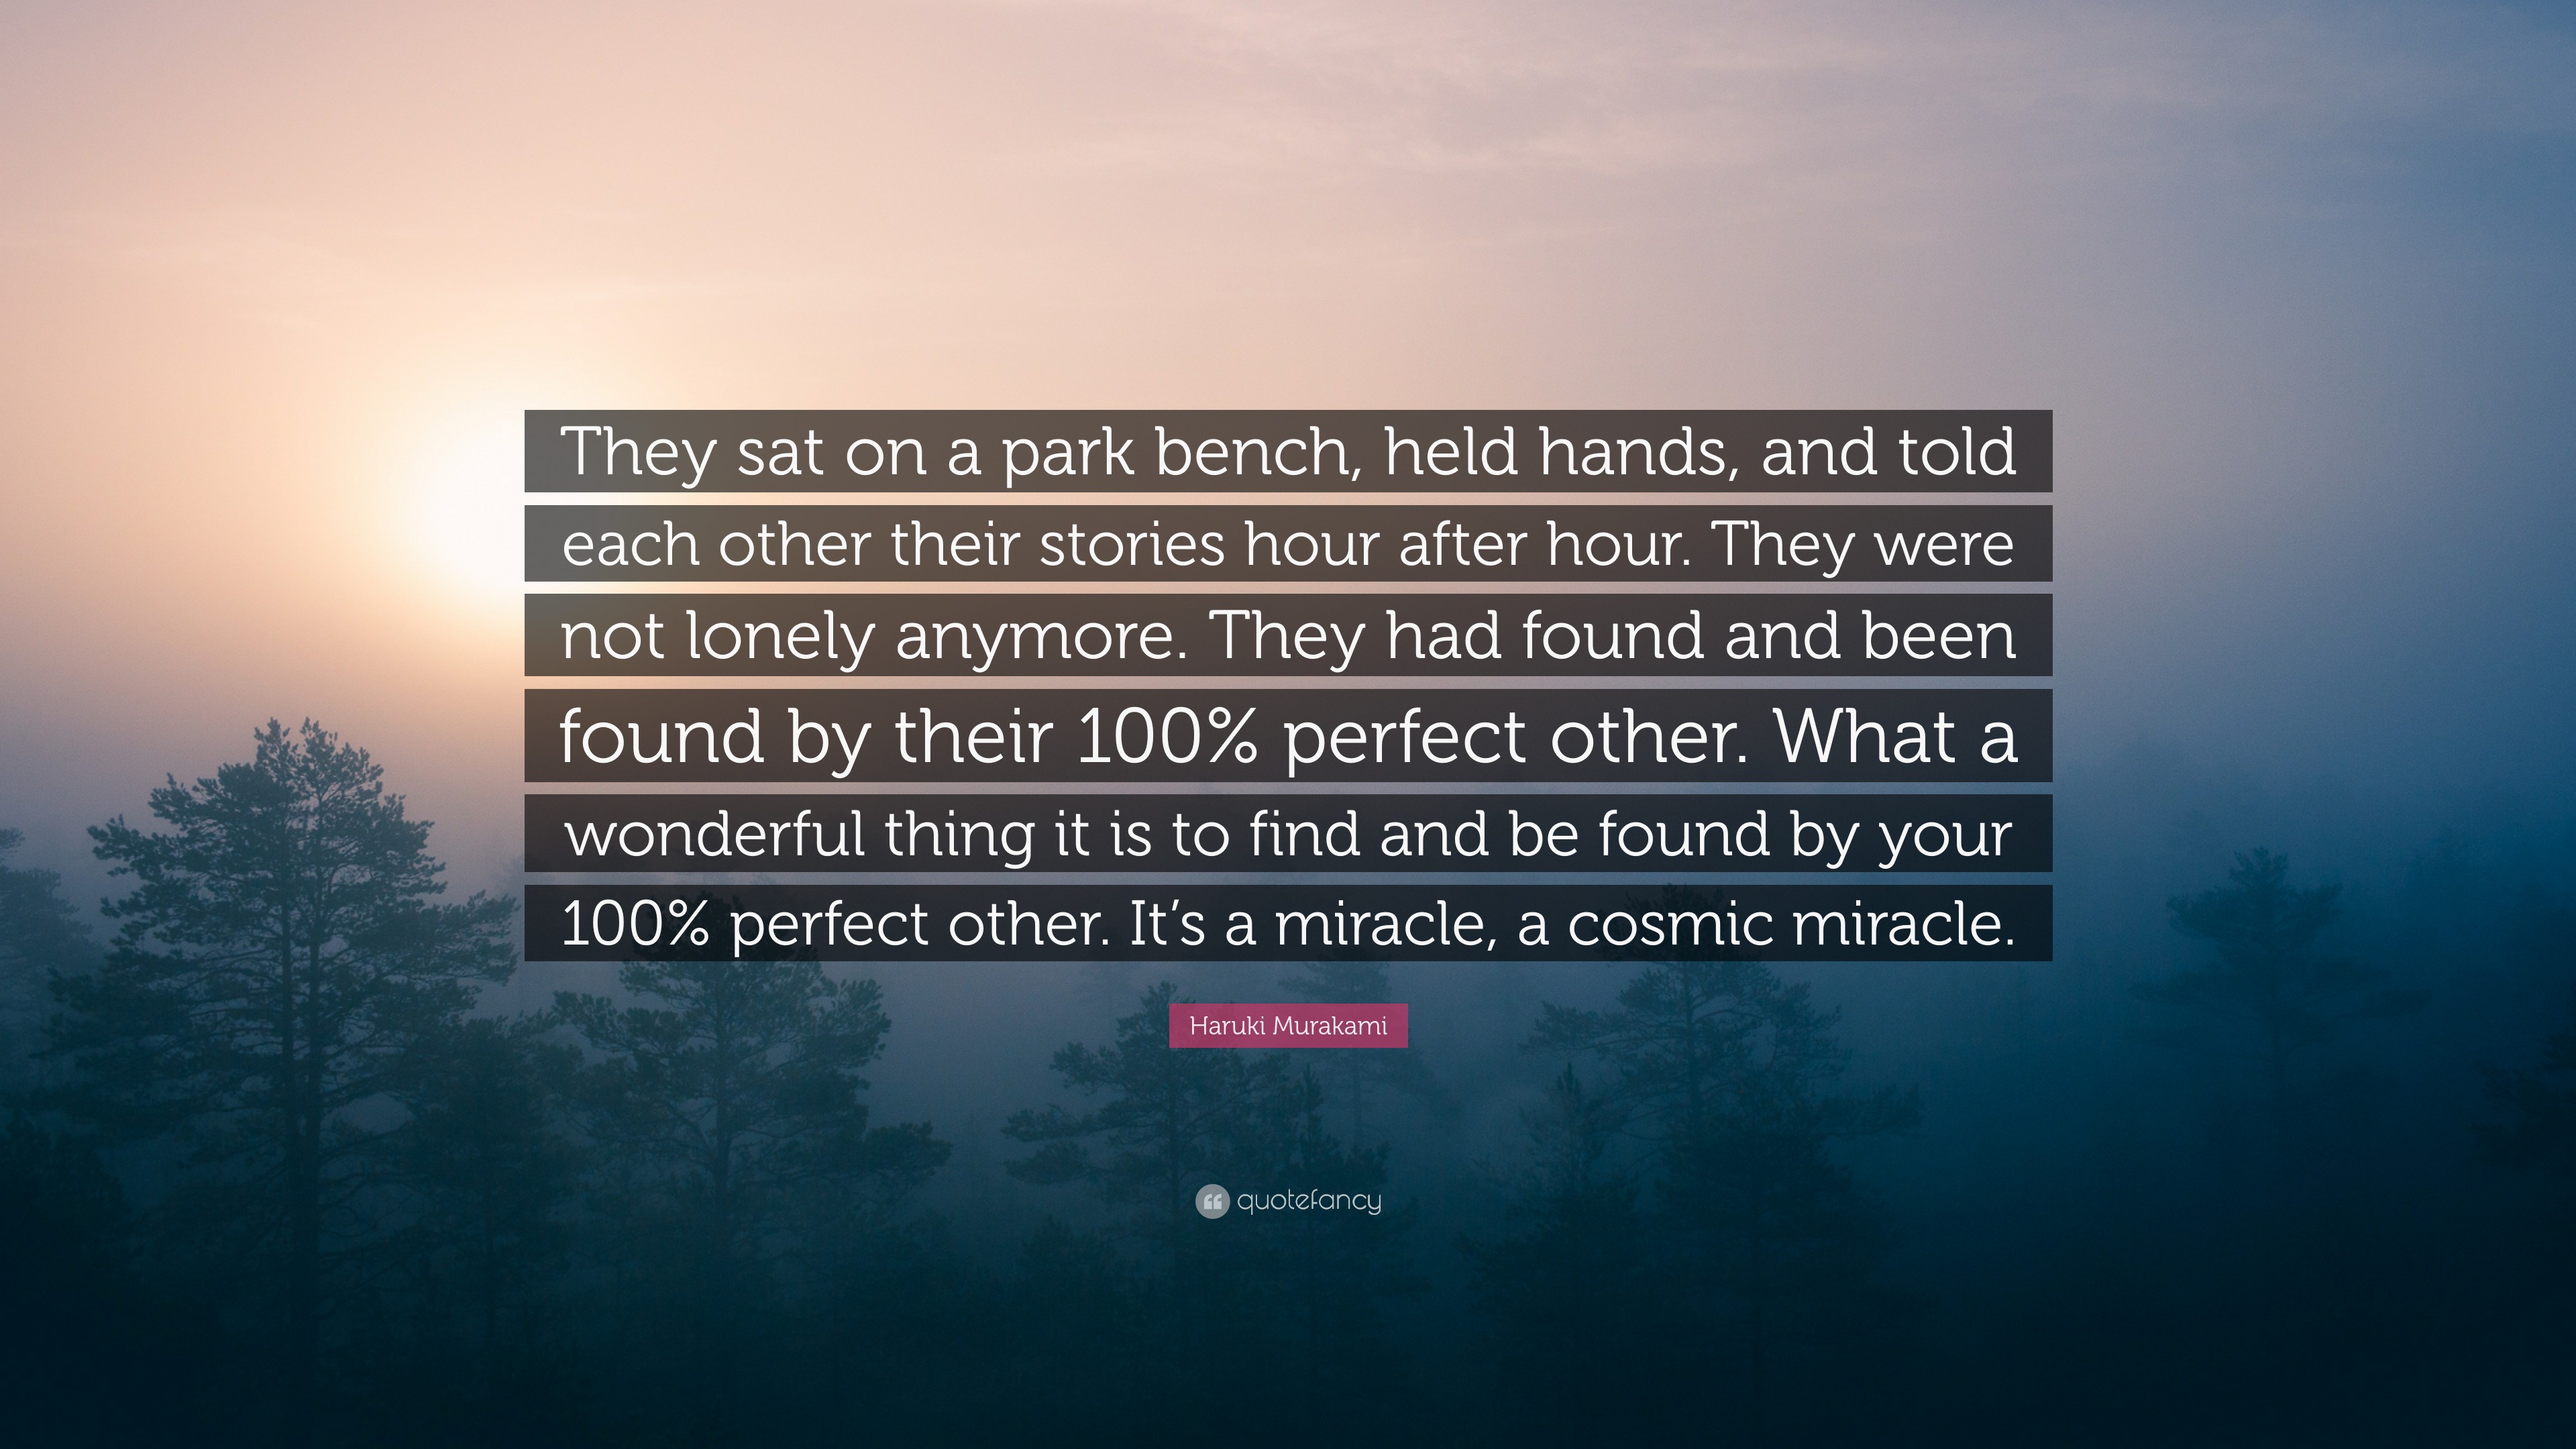 Haruki Murakami Quote They Sat On A Park Bench Held Hands And Told Each Other Their Stories Hour After Hour They Were Not Lonely Anymore T 7 Wallpapers Quotefancy